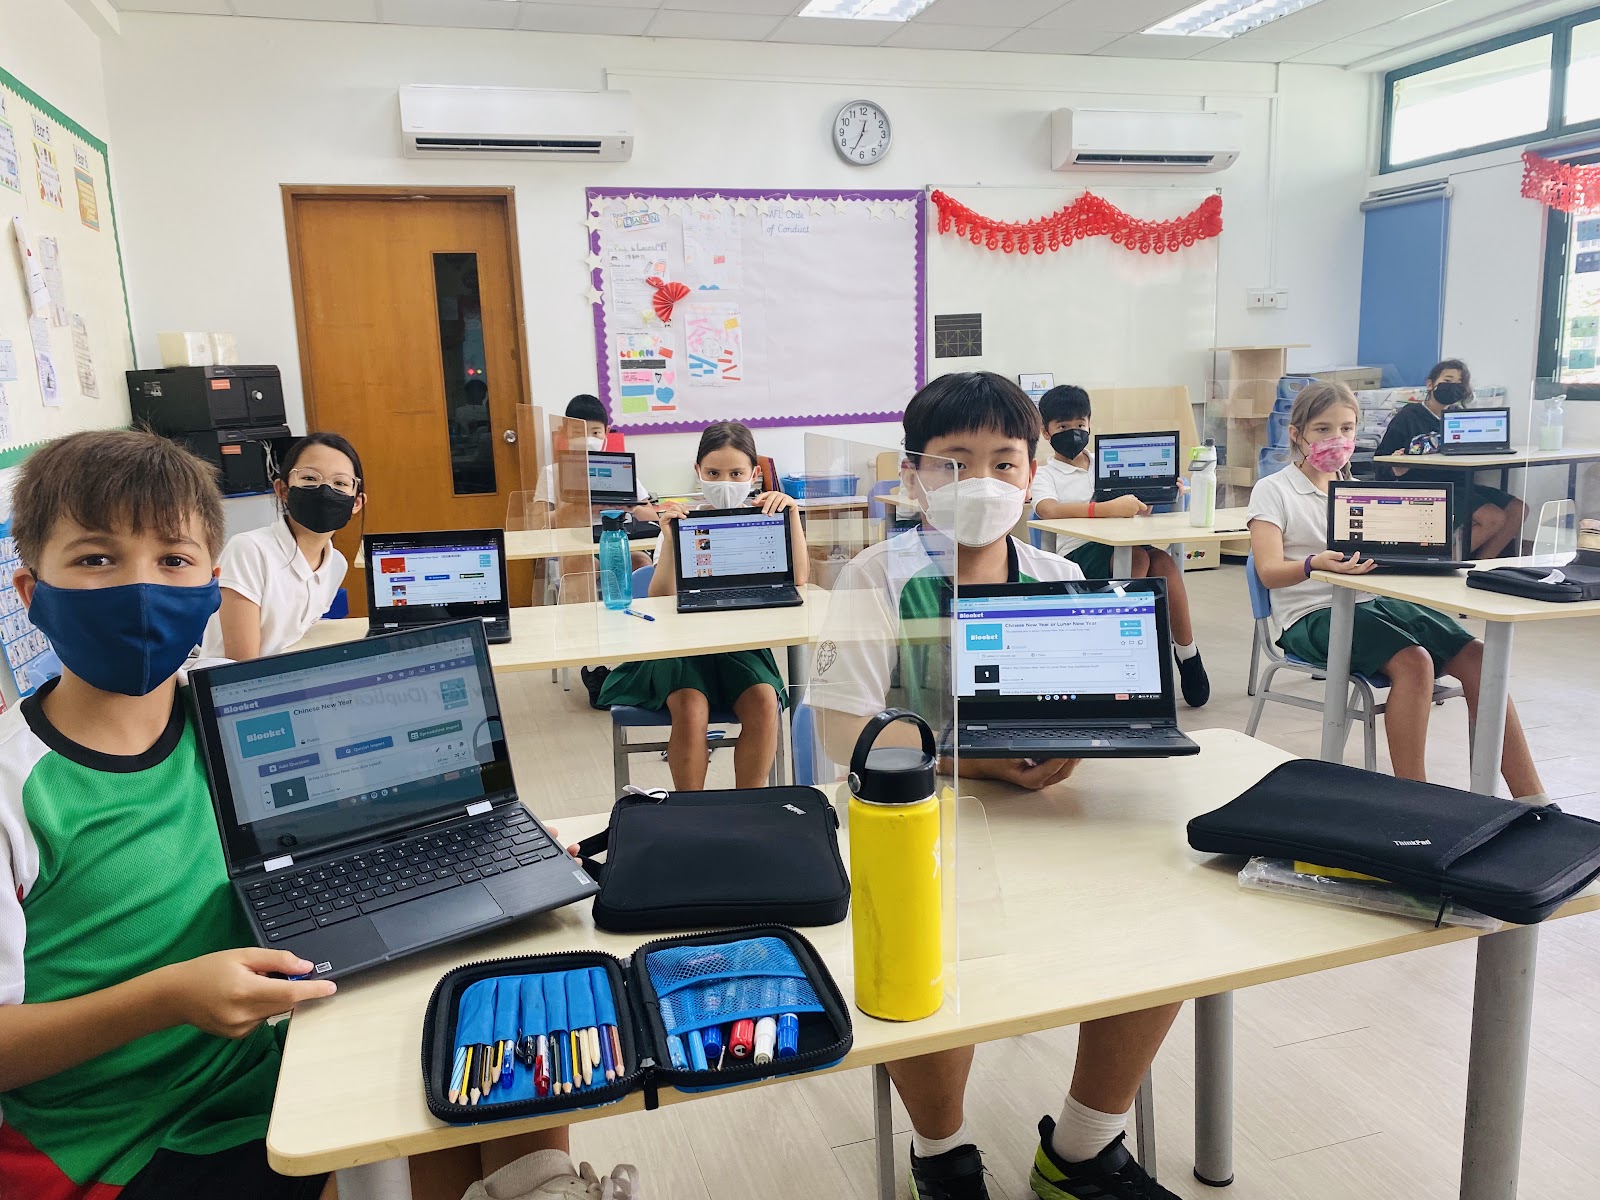 Year 5 students created their own Lunar New Year quizzes after researching some Lunar New Year facts